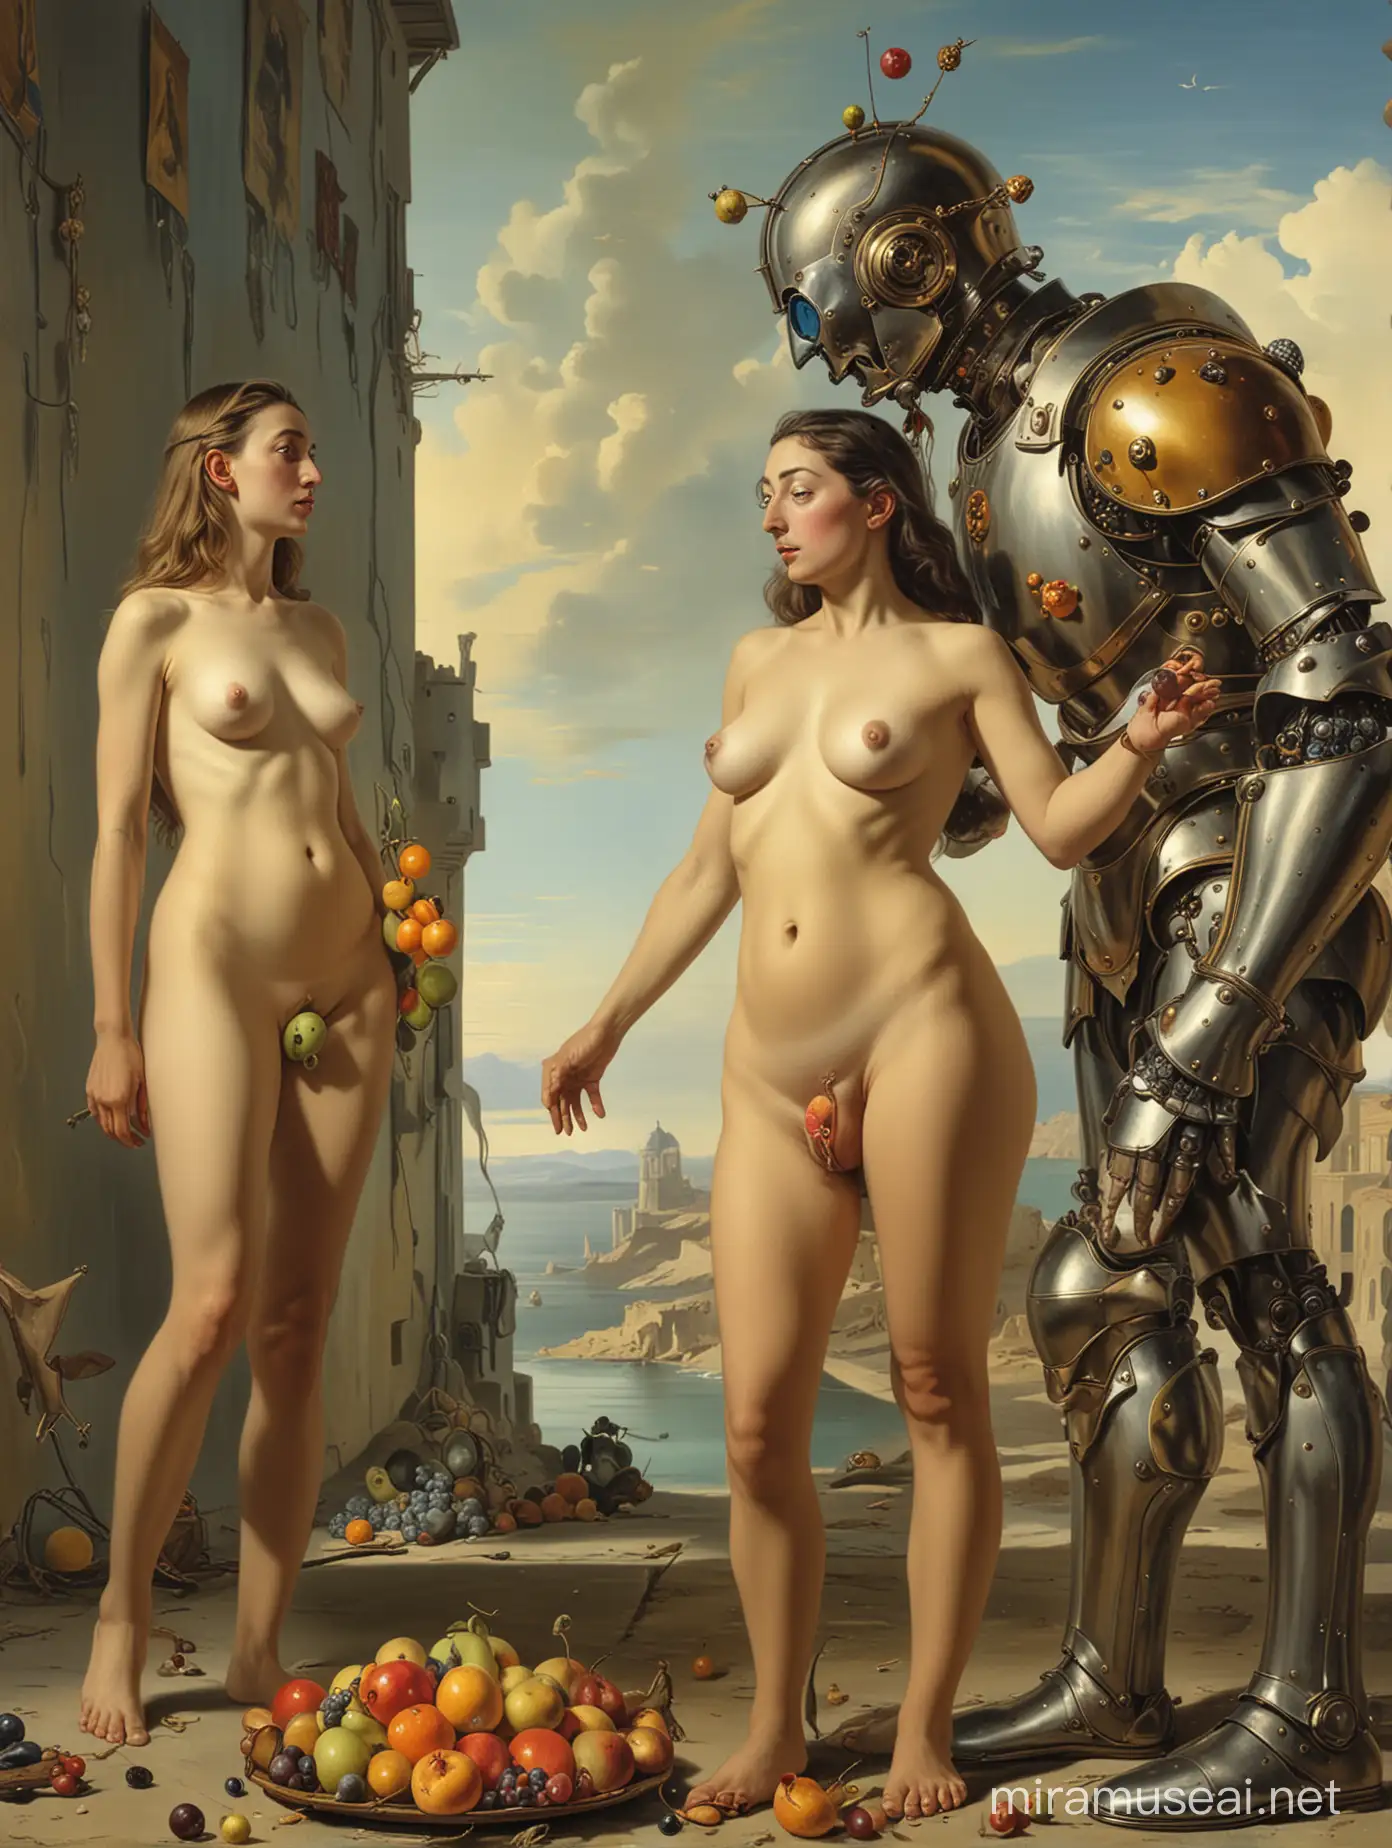 Surreal DaliInspired Scene with Nude Woman Armored Elder and Geopolitical Robot Birth